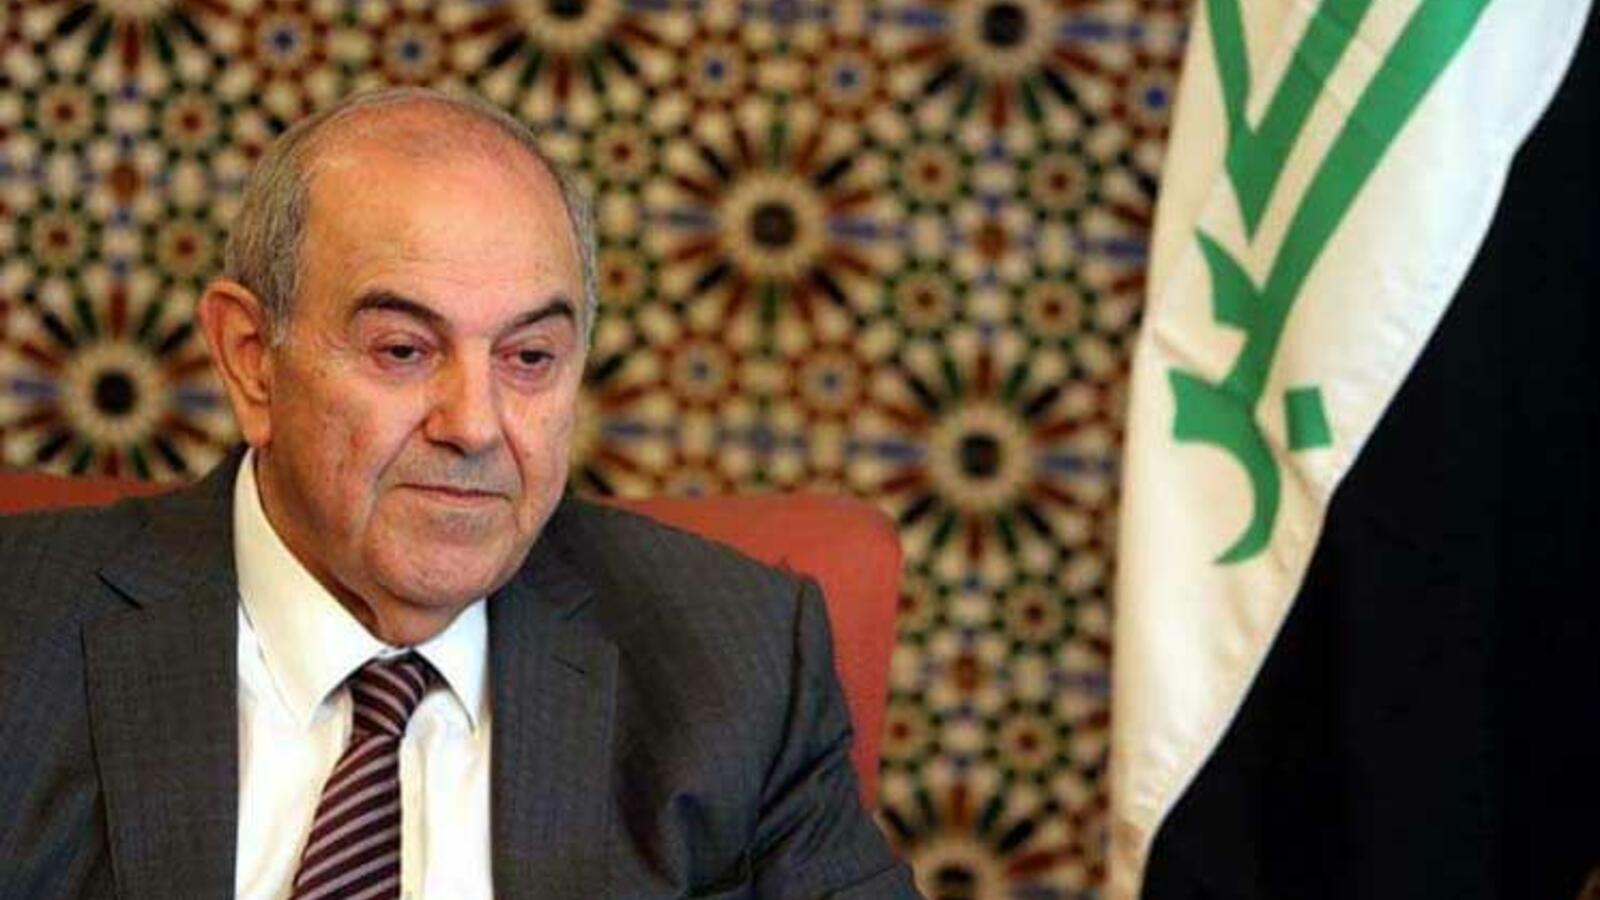 Allawi calls the President of the Republic to "save Iraq"